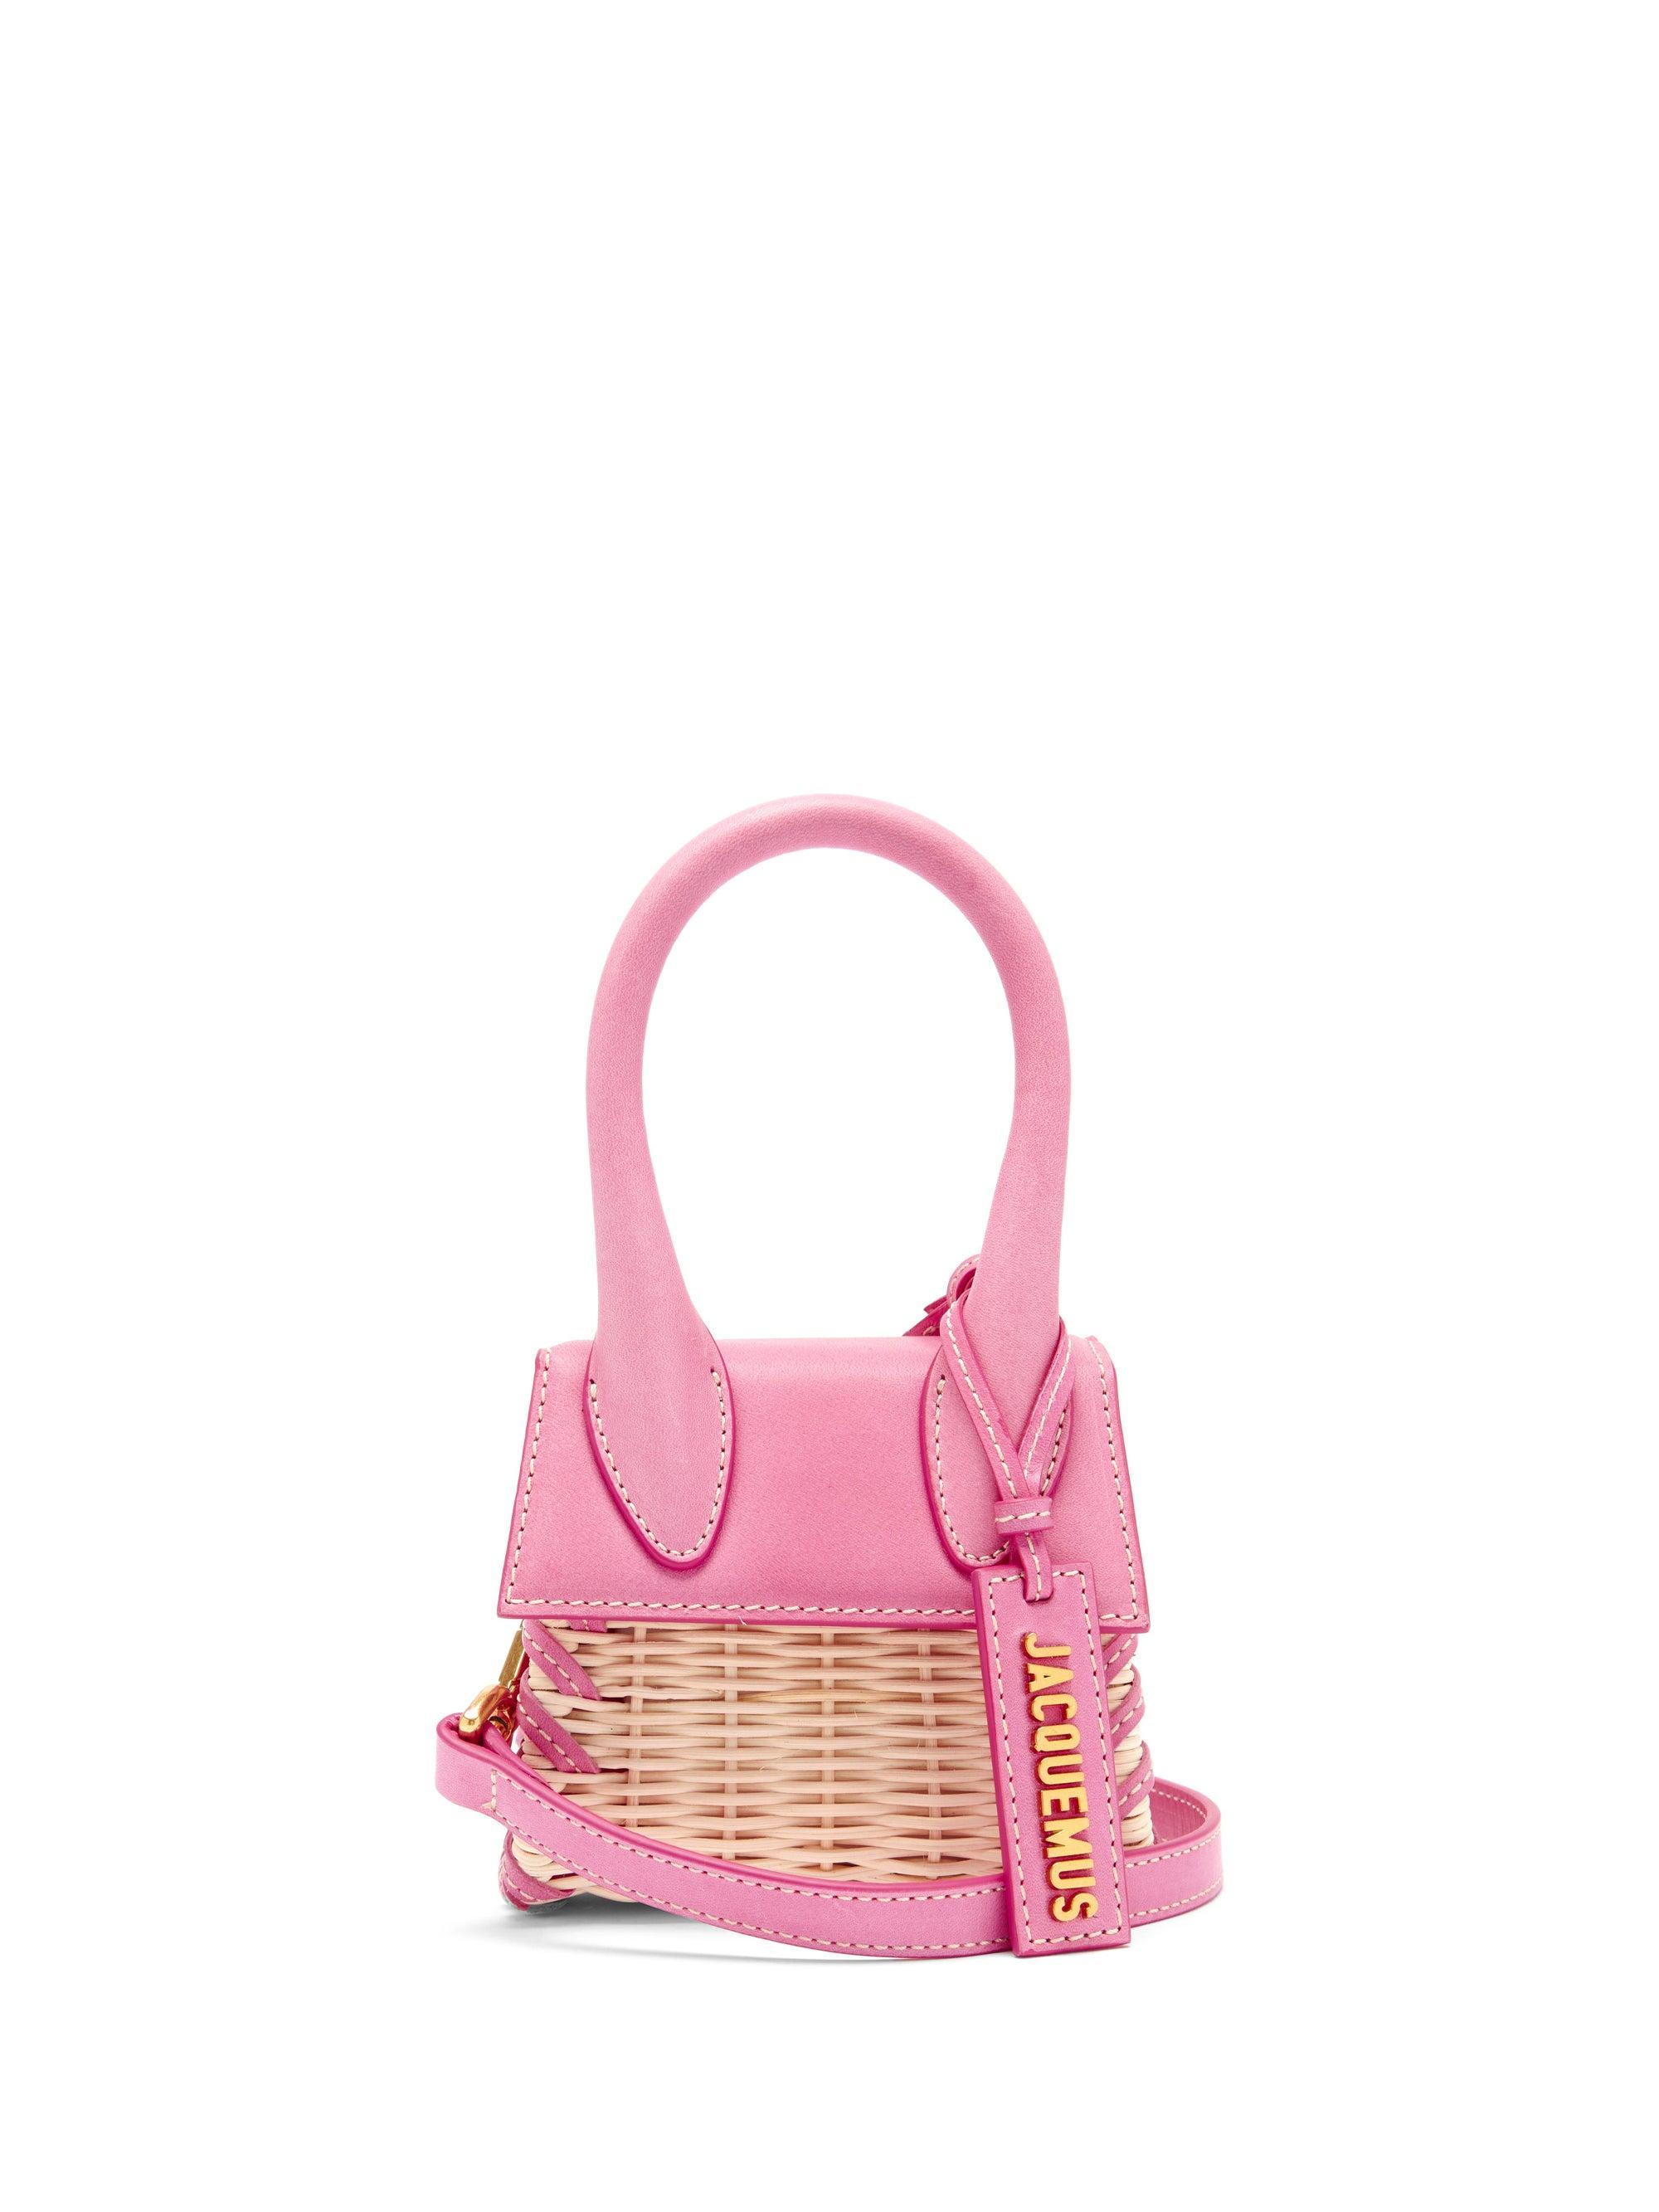 Jacquemus Le Chiquito Leather-trimmed Wicker Tote in Pink | Lyst